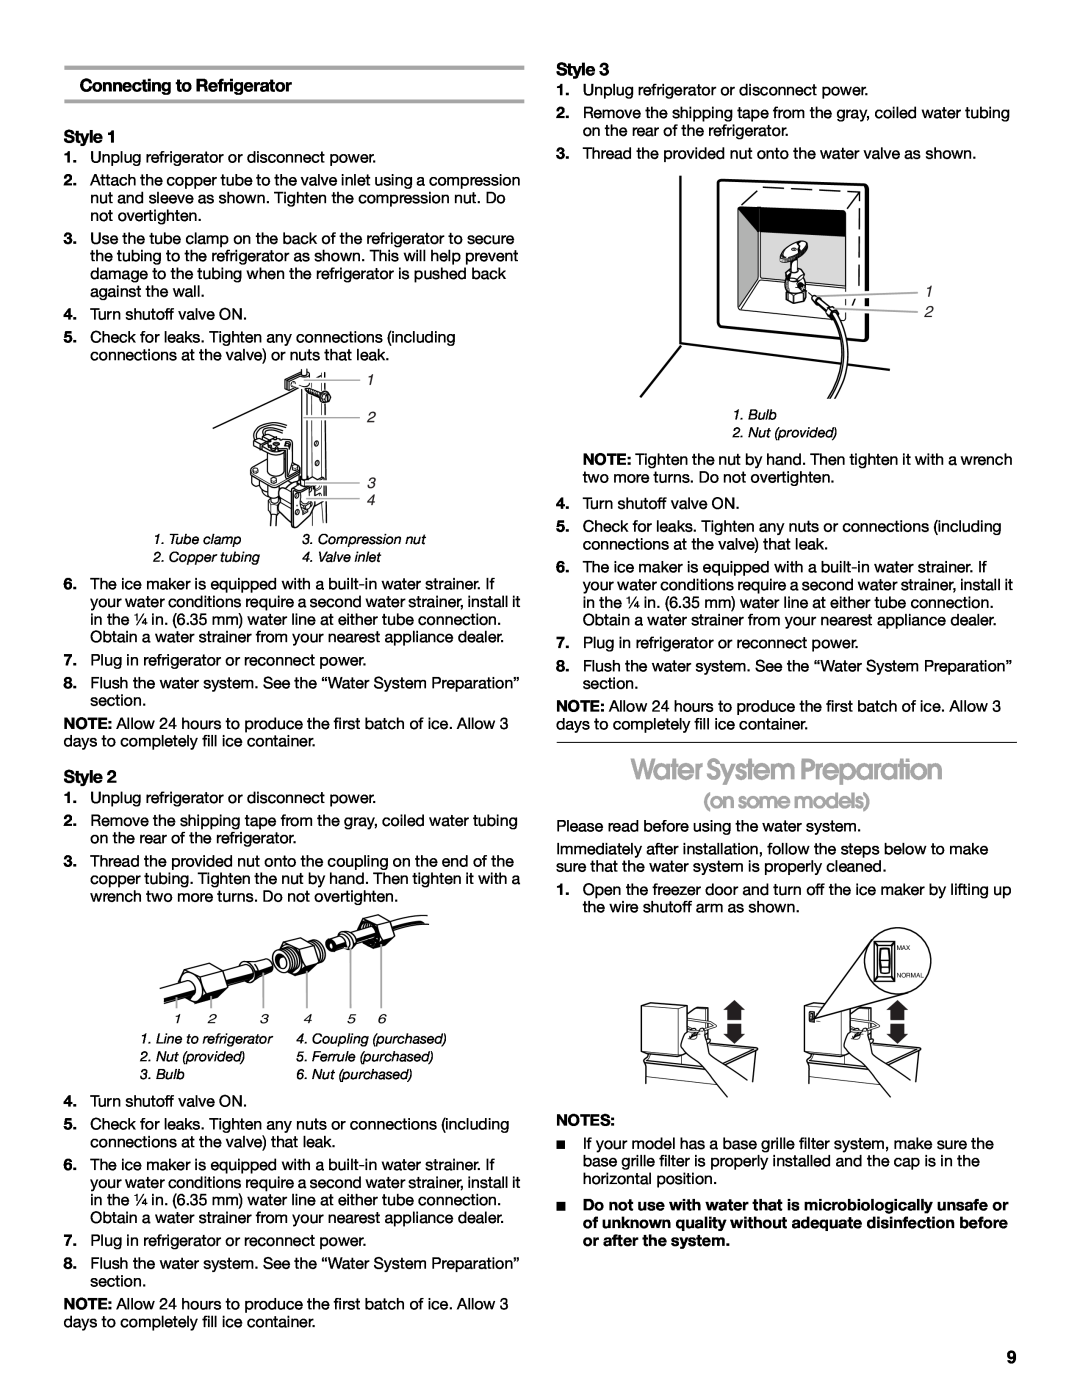 Whirlpool RS22AQXKQ02 manual Water System Preparation, on some models, Connecting to Refrigerator Style 